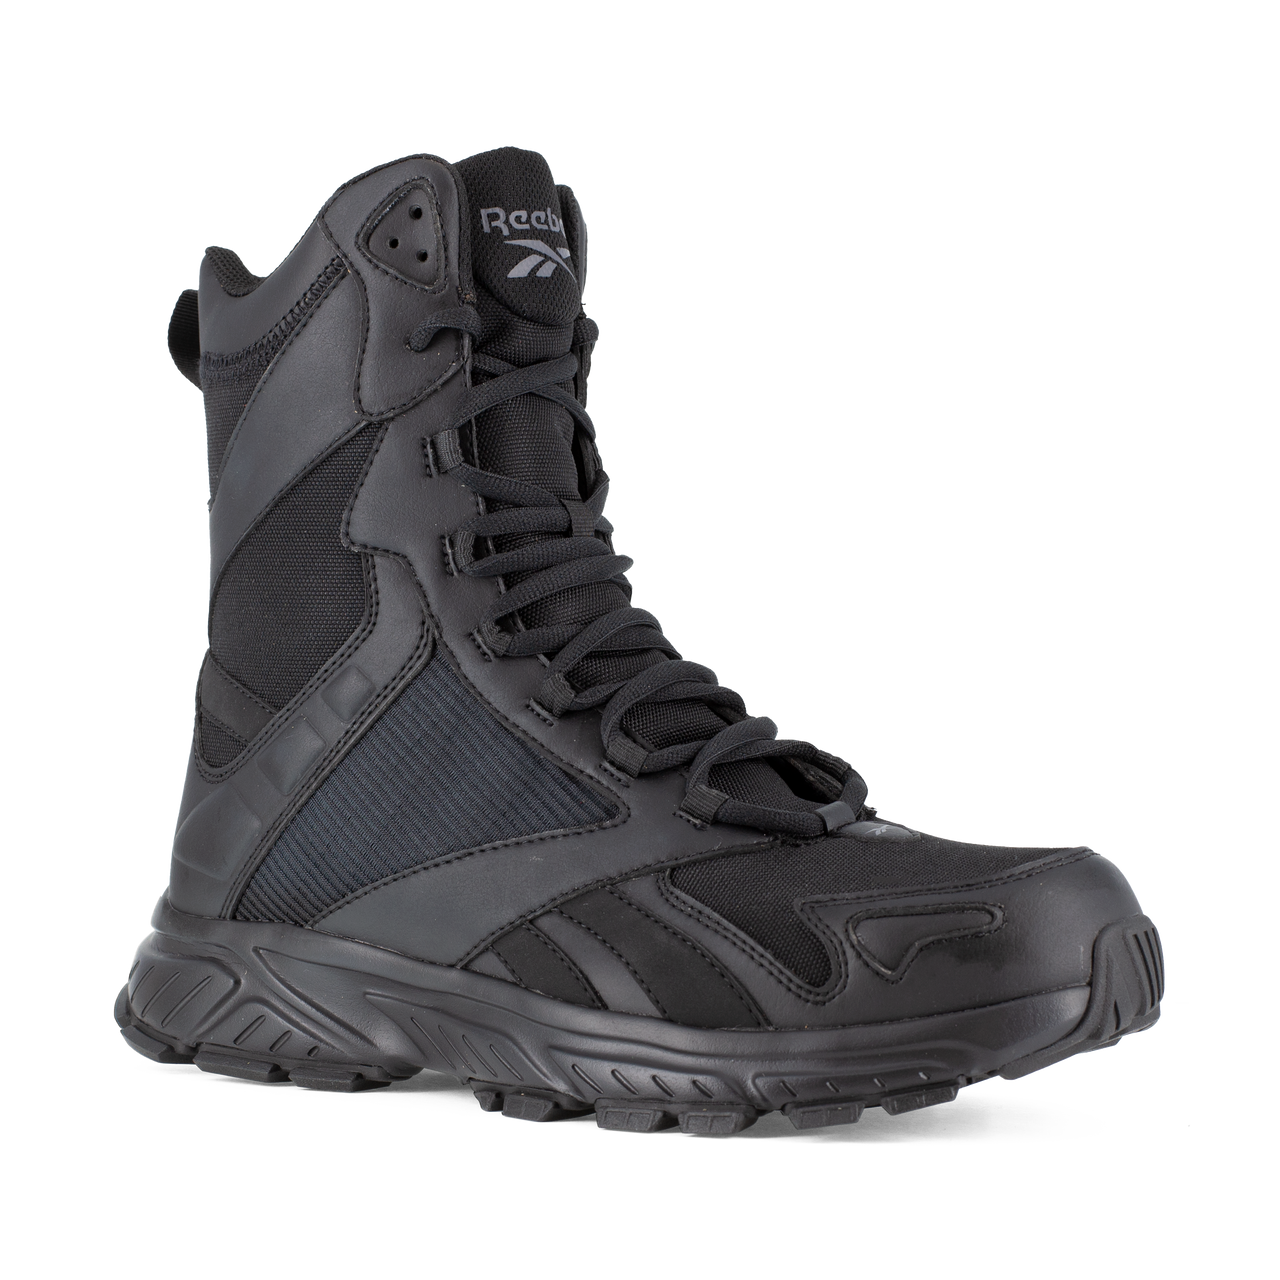 Reebok Hyperium Tactical 8'' Tactical Boot with Soft Toe - Black RB6655 - Newest Products